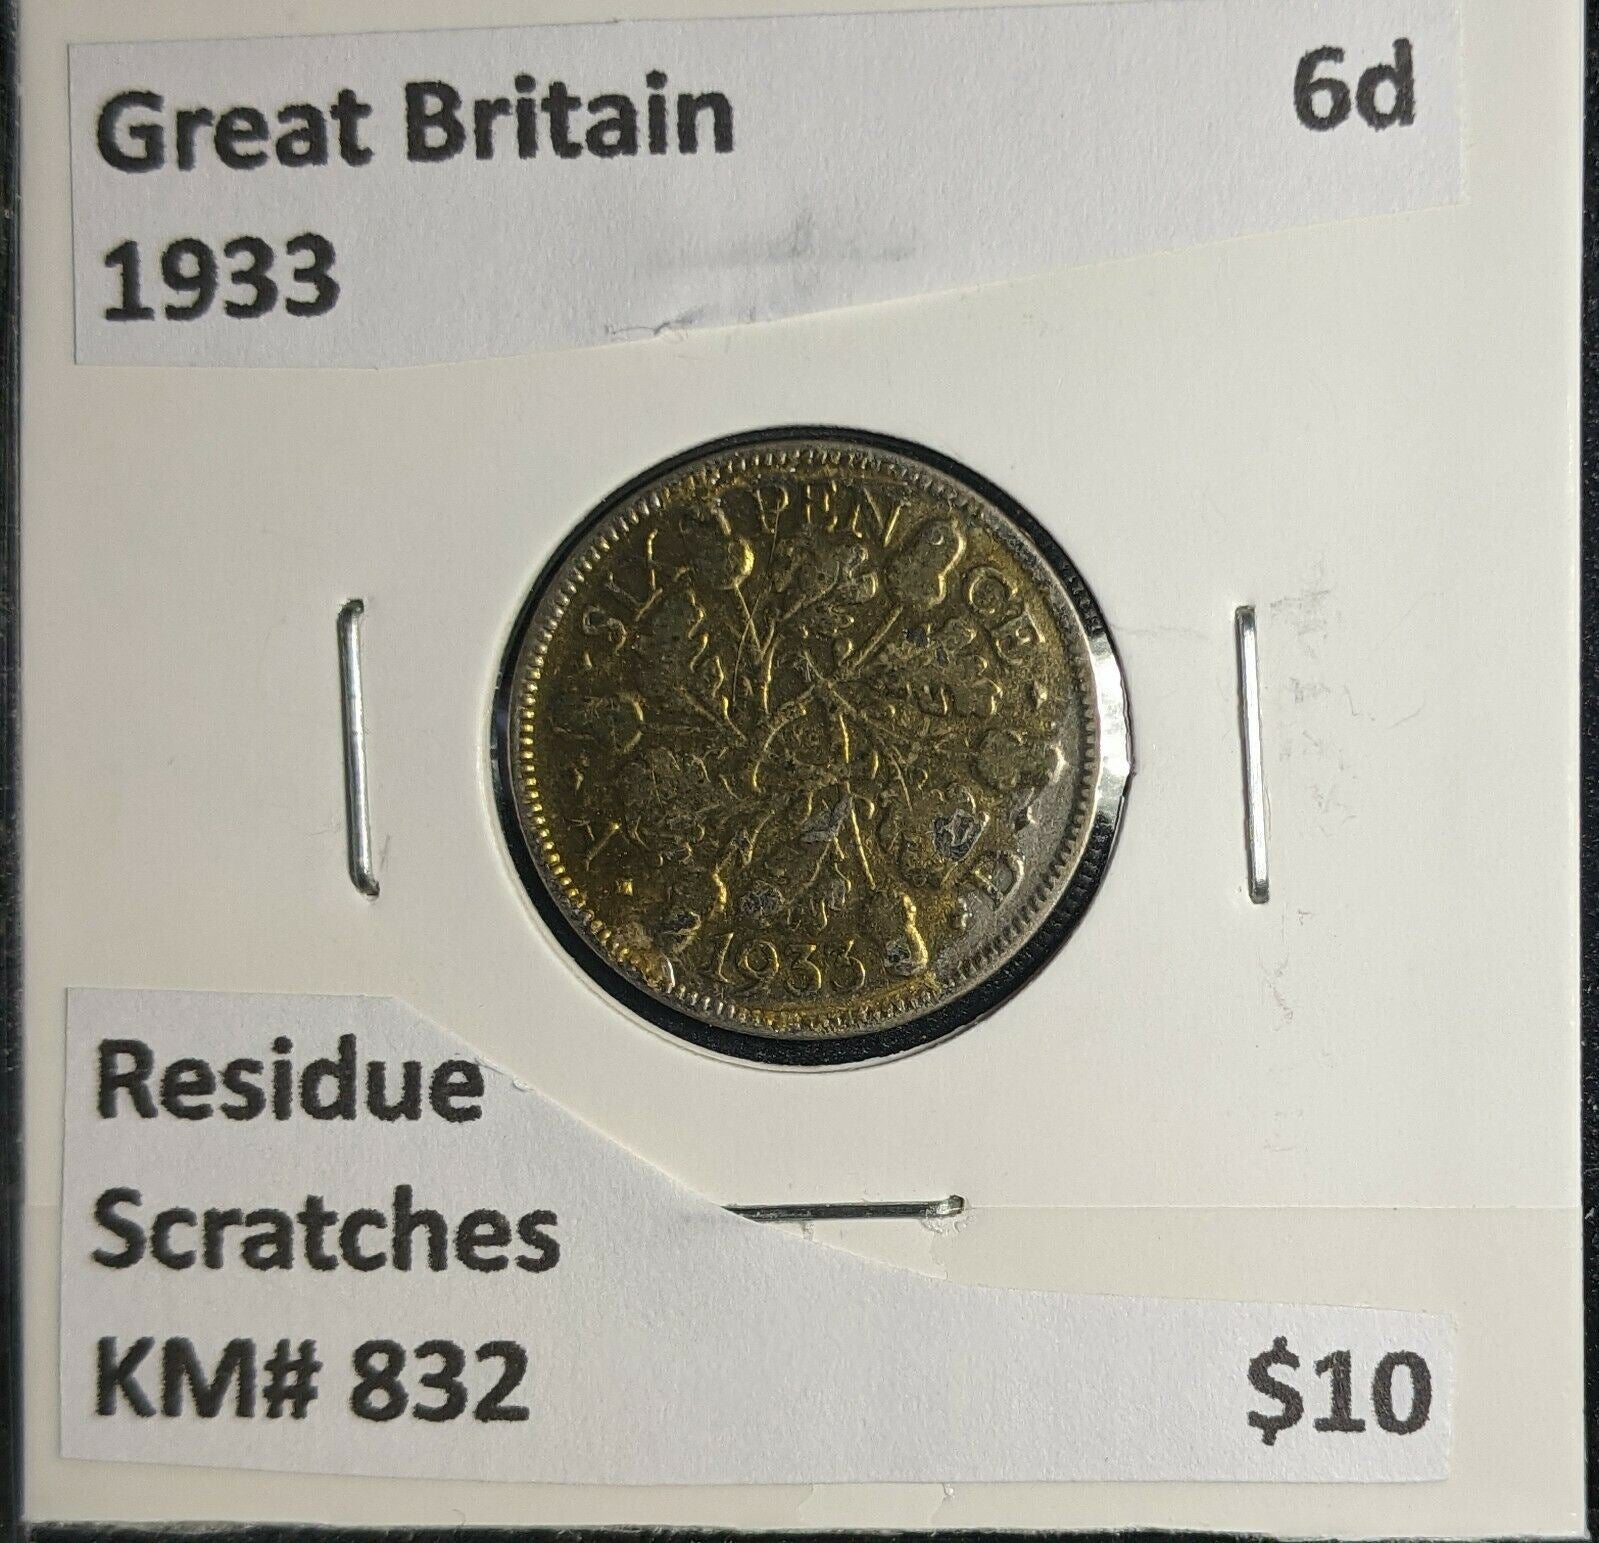 Great Britain 1933 6 Pence Sixpence 6d KM# 832 Residue Scratches #982 4B